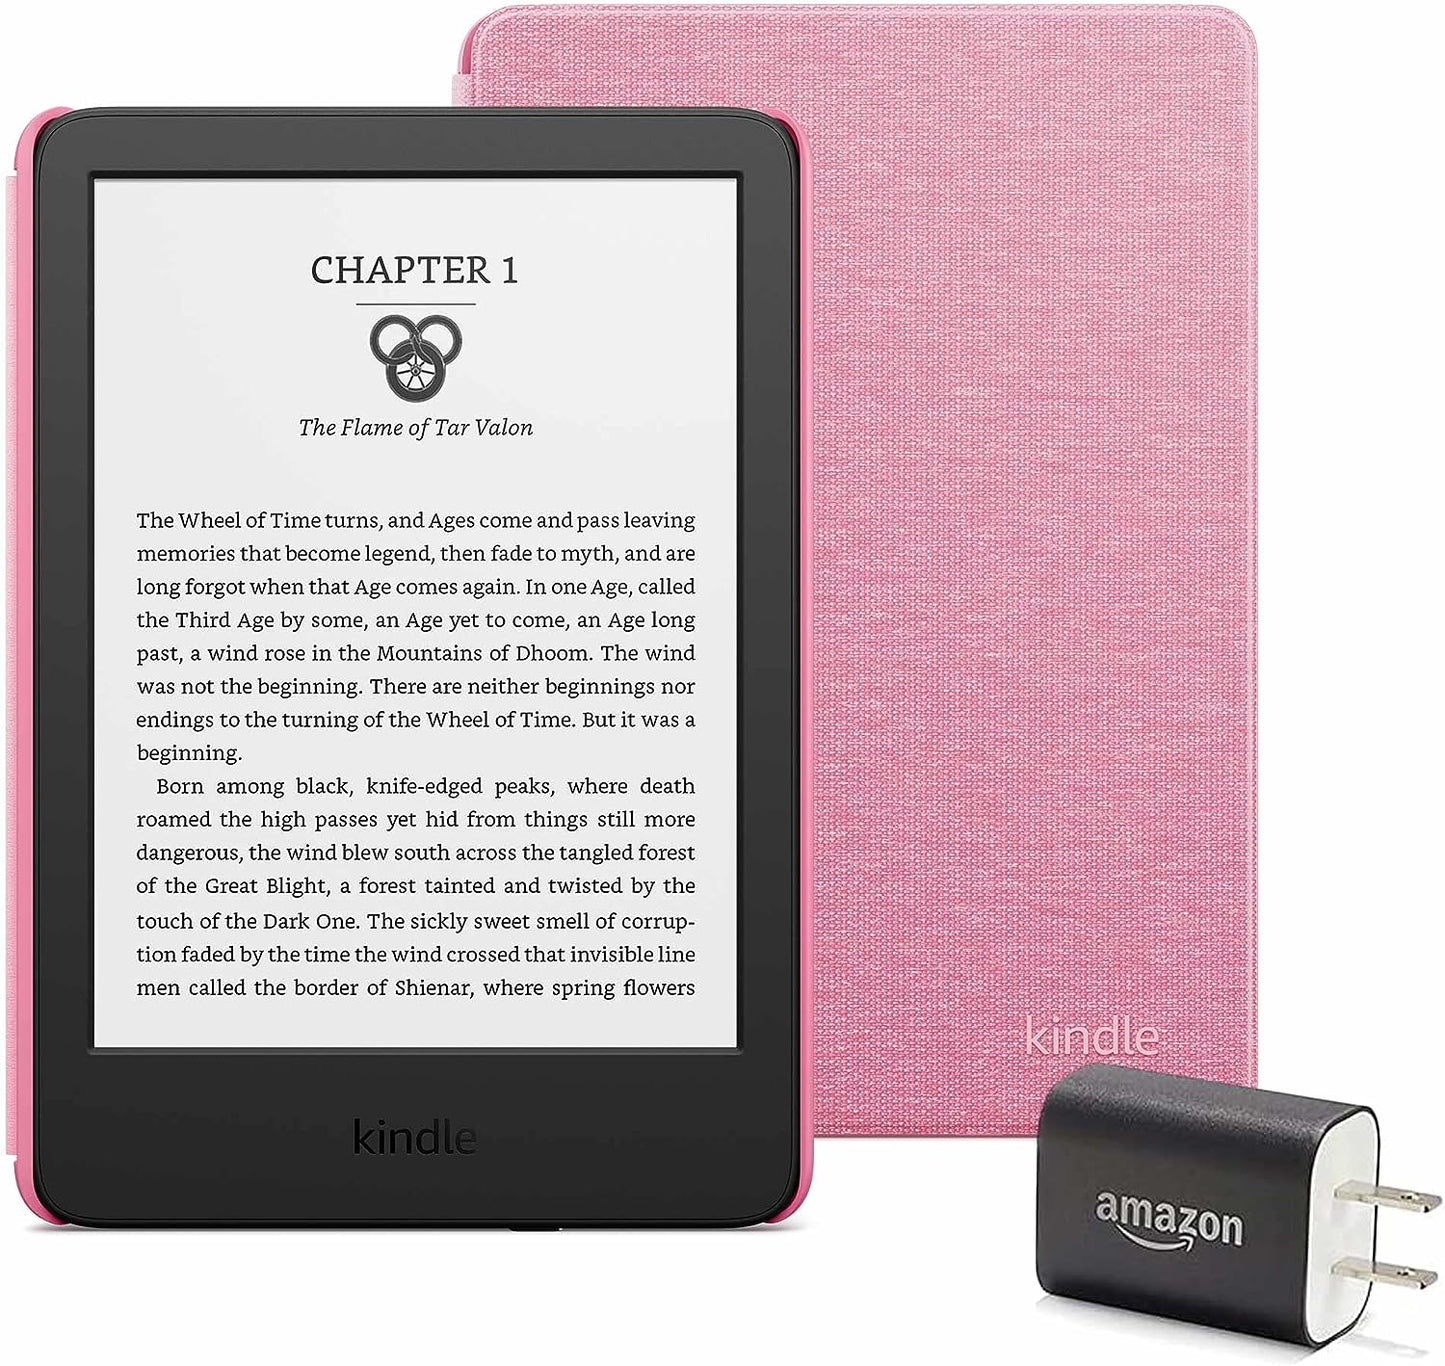 Kindle Essentials Bundle including Kindle (2022 release) - Black - Without Lockscreen Ads, Fabric Coverand Power Adapter